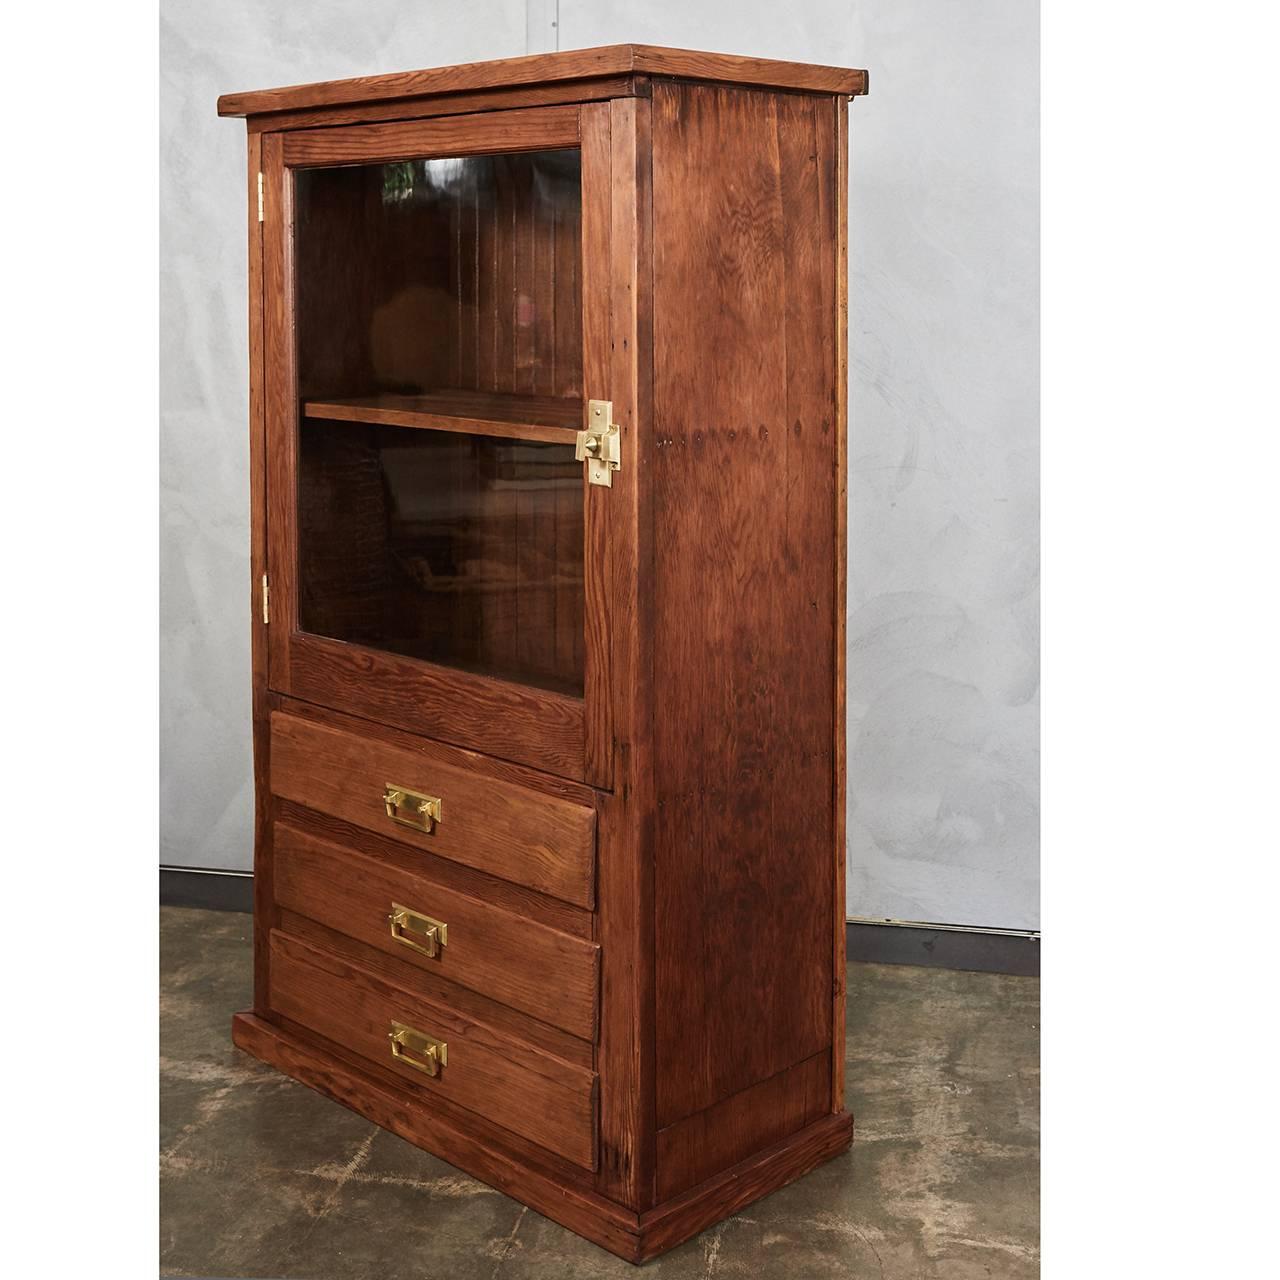 This handsome pine cabinet from the early 20th century is well suited for a variety of settings. The piece has the original brass fixtures that have been polished to highlight their appearance. The body has a shelf and a glass door above three